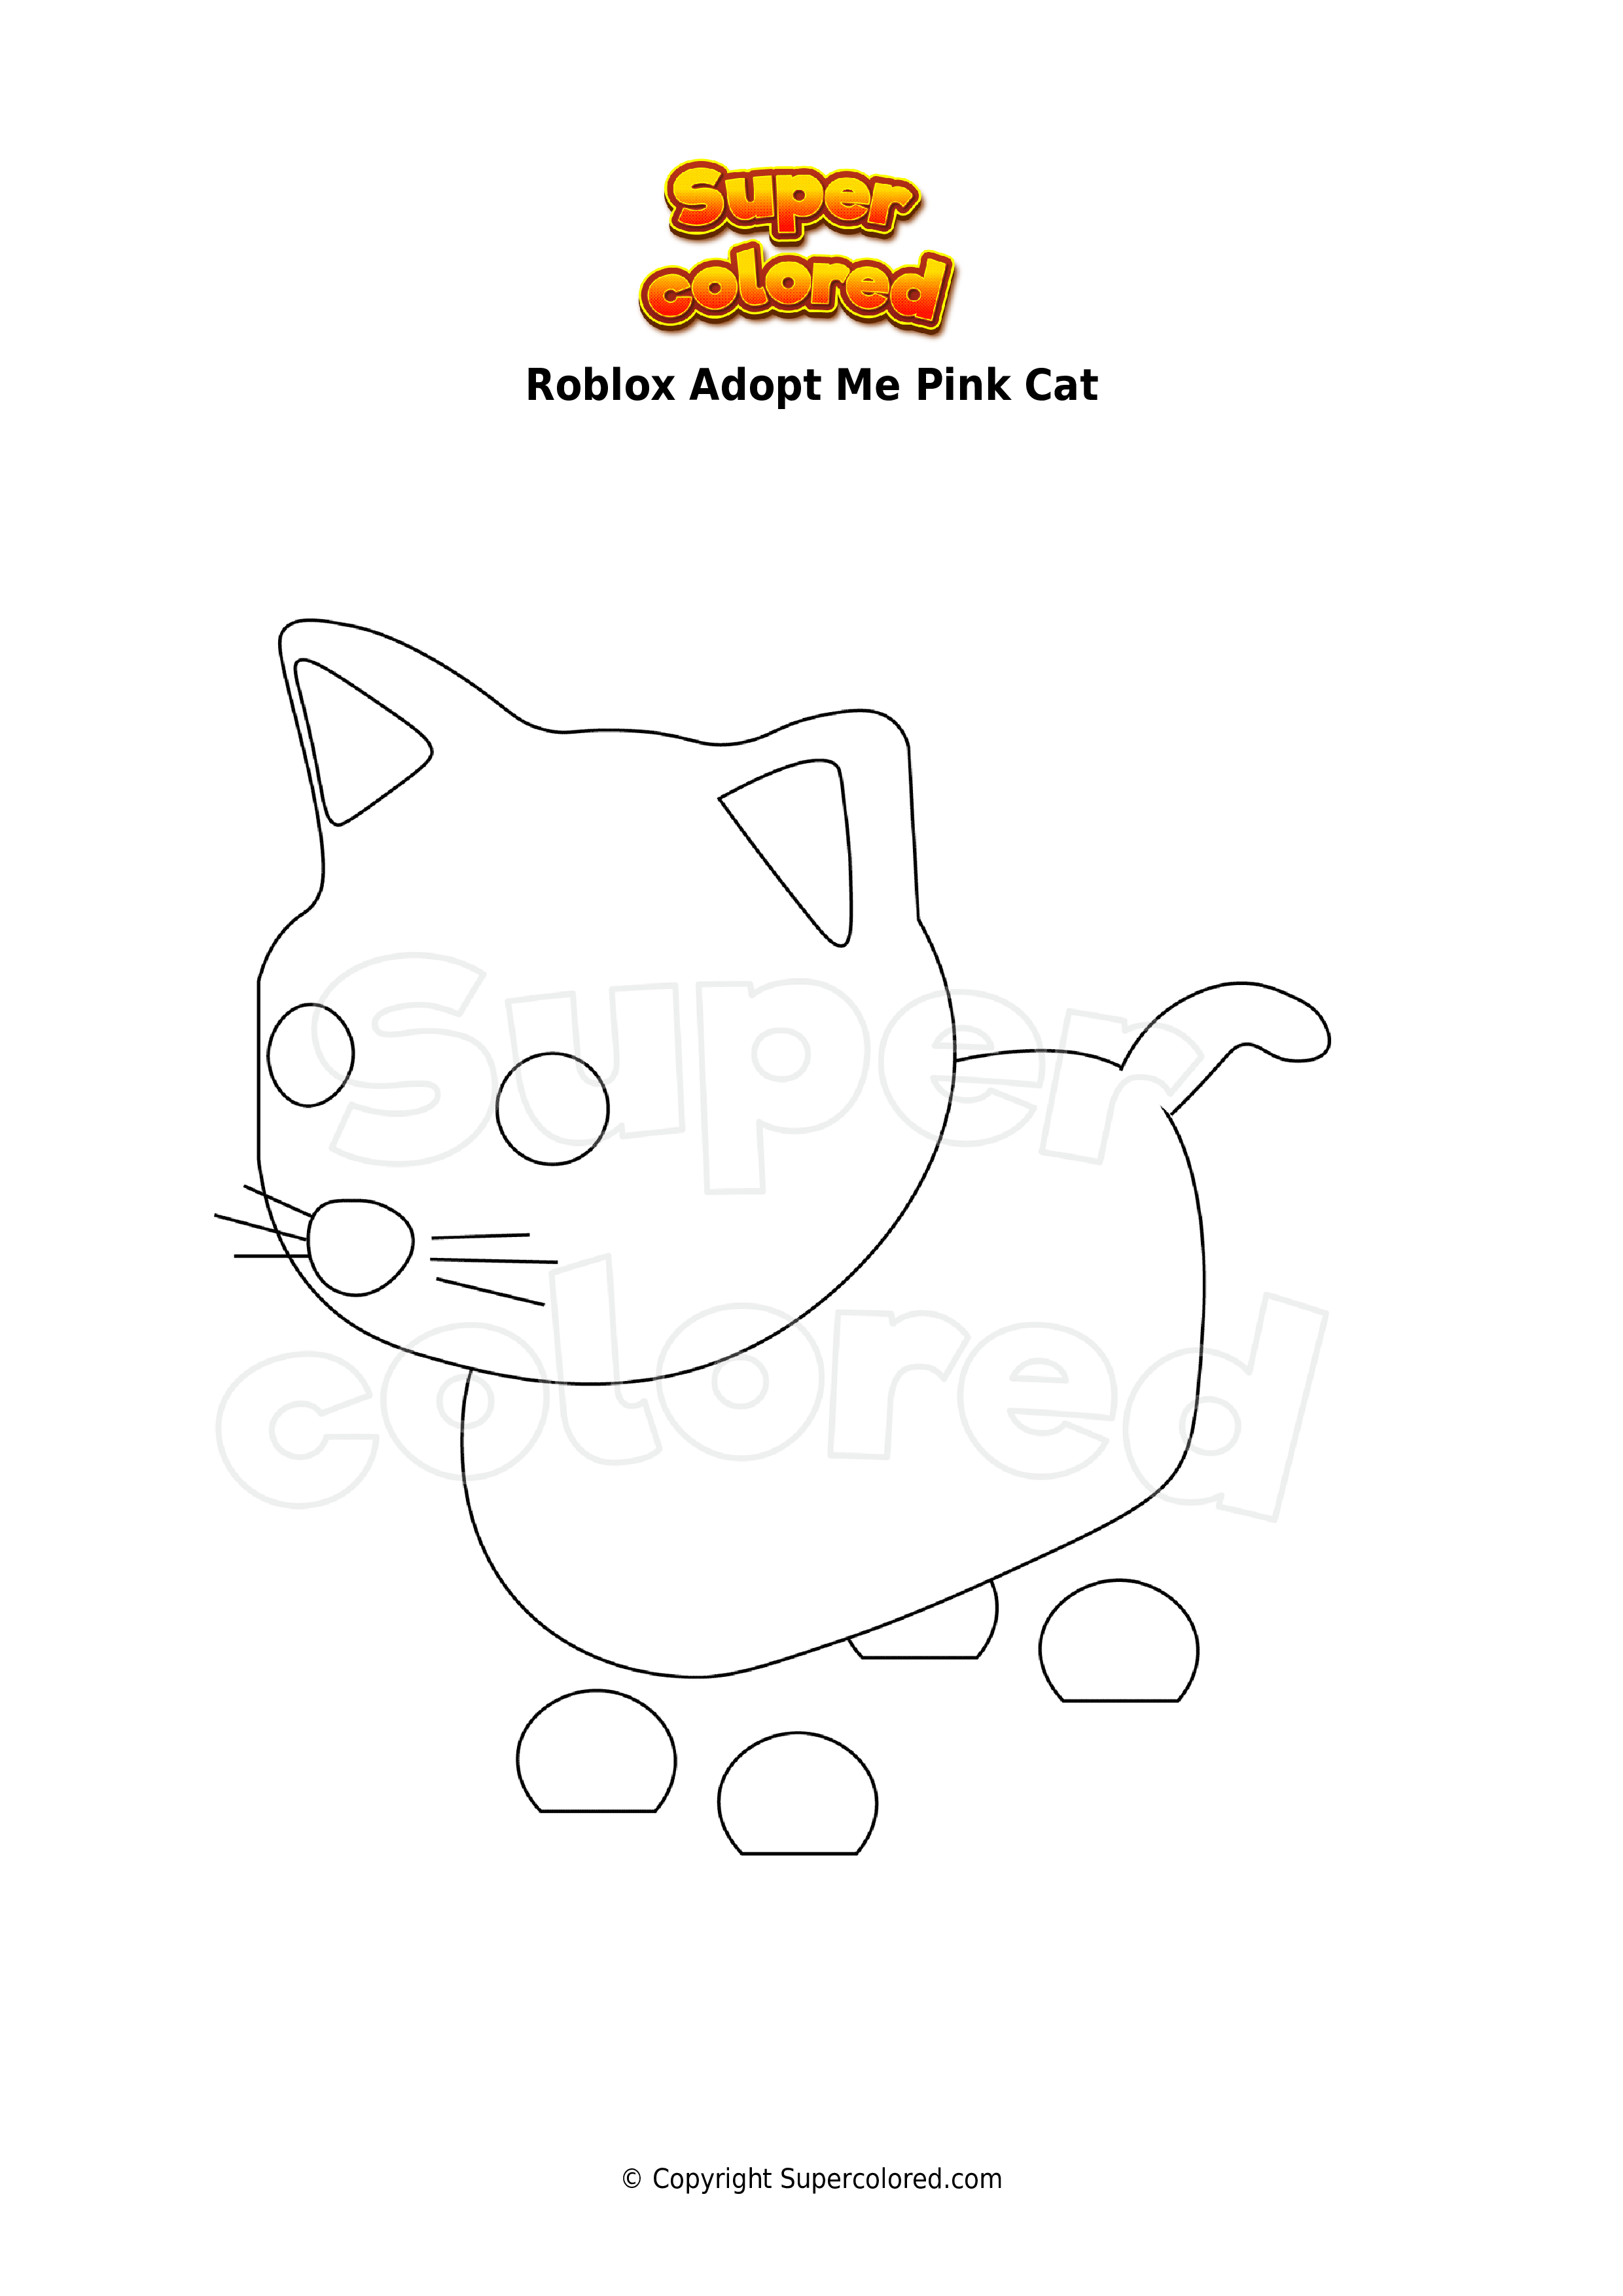 Coloring page Roblox Adopt Me Pink Cat - Supercolored.com